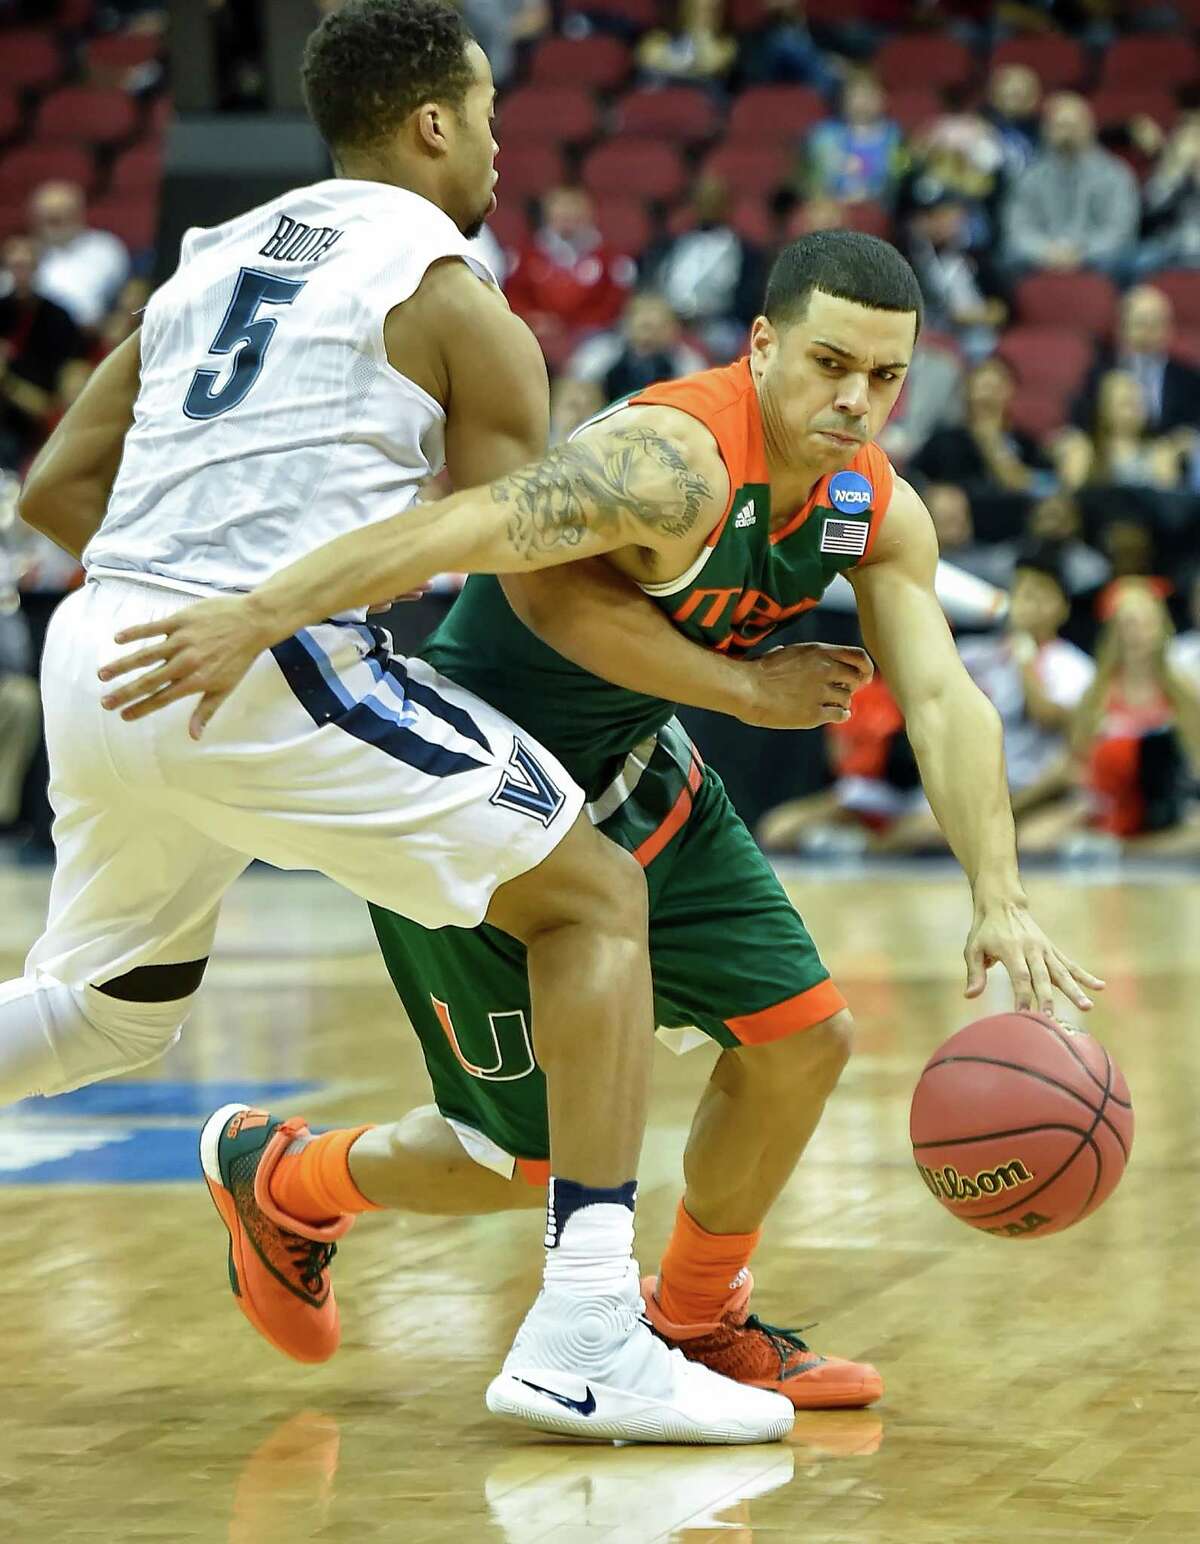 Miami's Angel Rodriguez (13) drives against Villanova's Phil Booth (5) in the first half during a Sweet 16 matchup in the NCAA Tournament's South region at the KFC Yum! Center in Louisville, Ky., on Thursday, March 24, 2016.